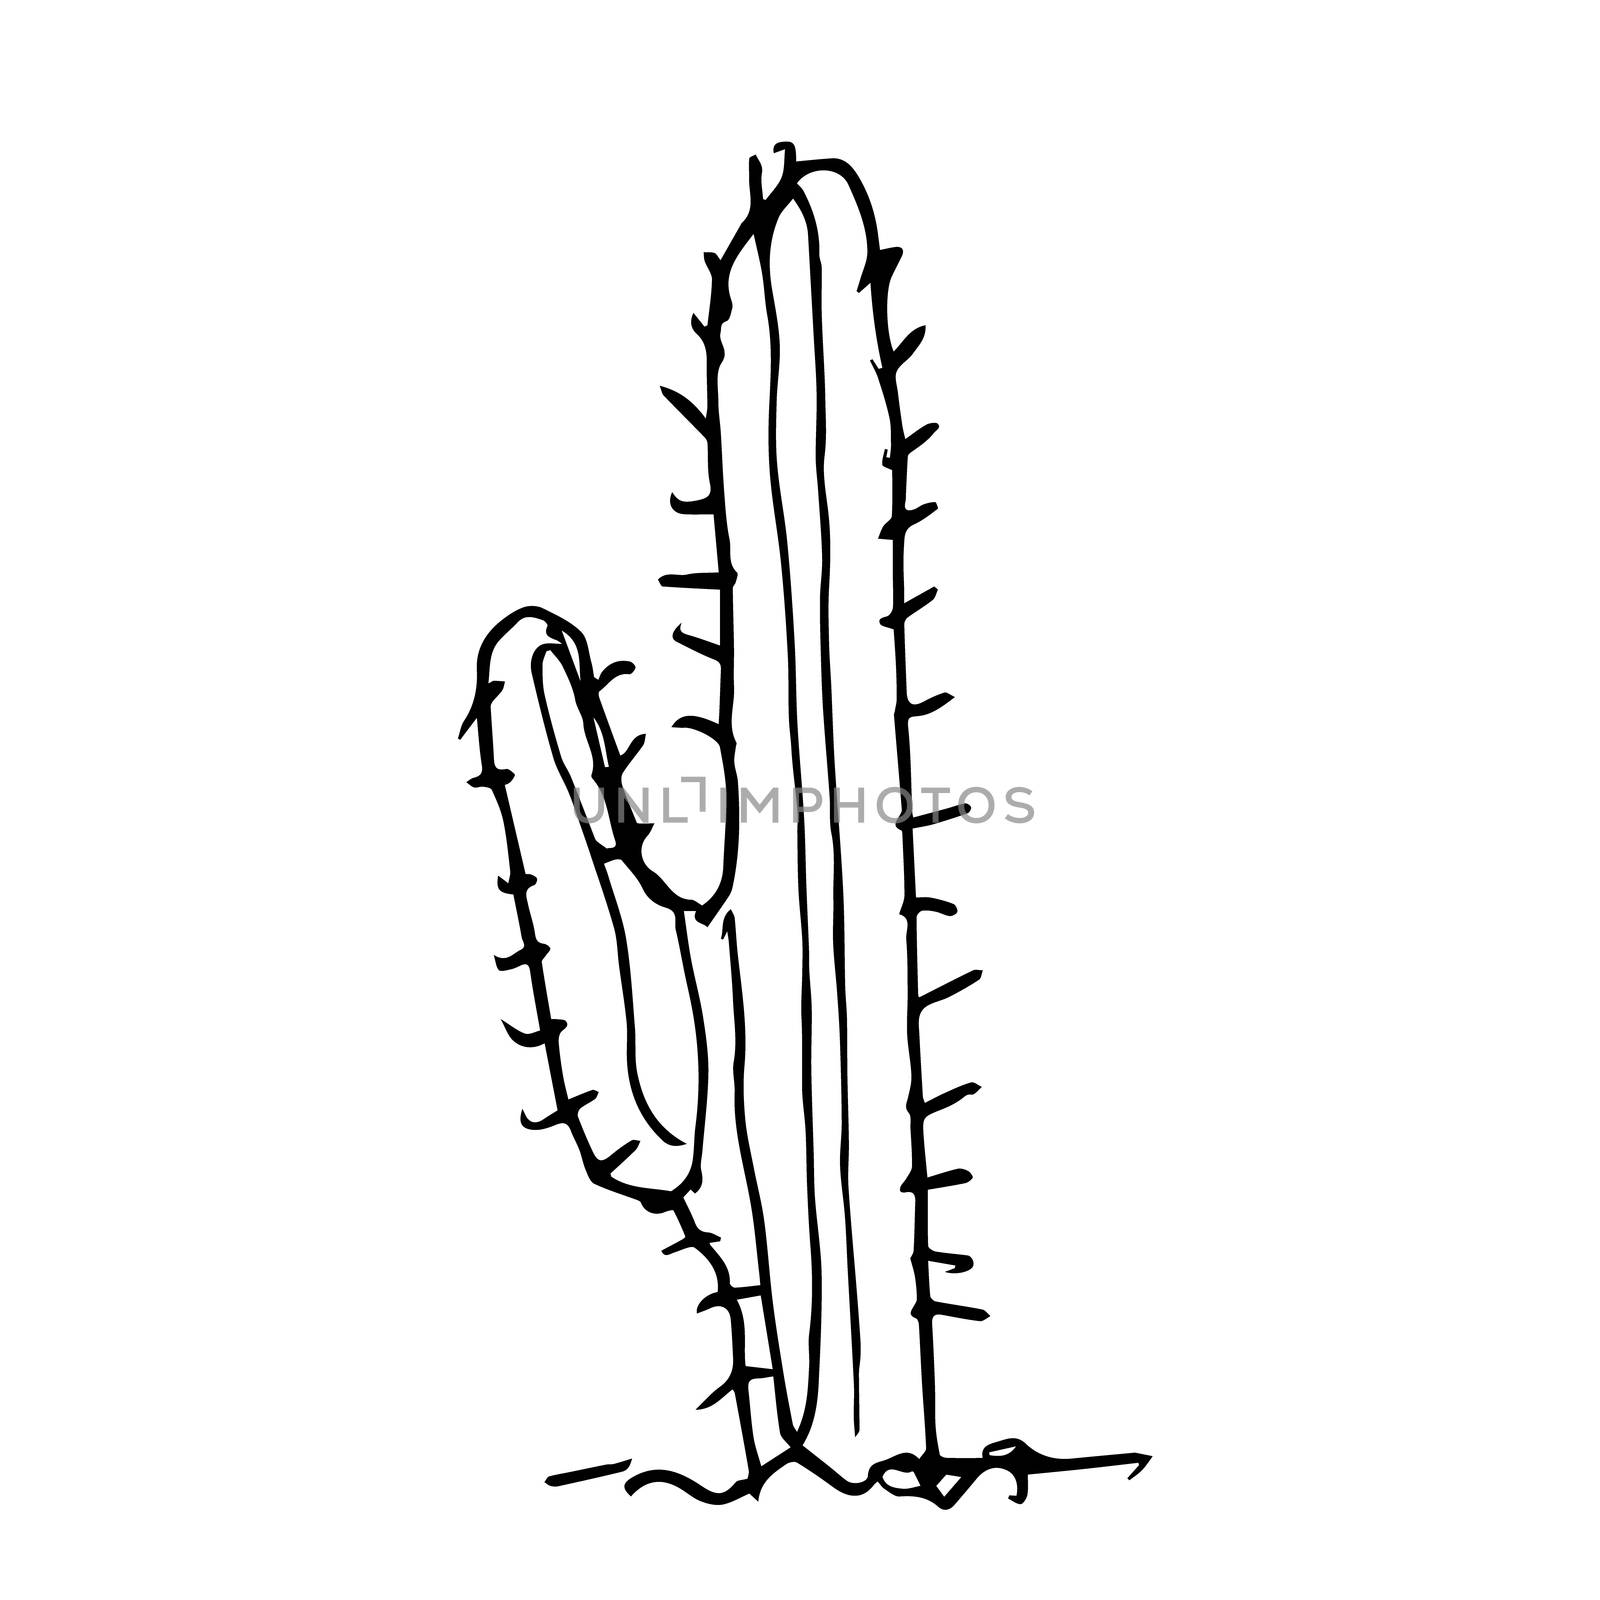 freehand sketch illustration of cactus doodle hand drawn in kid style